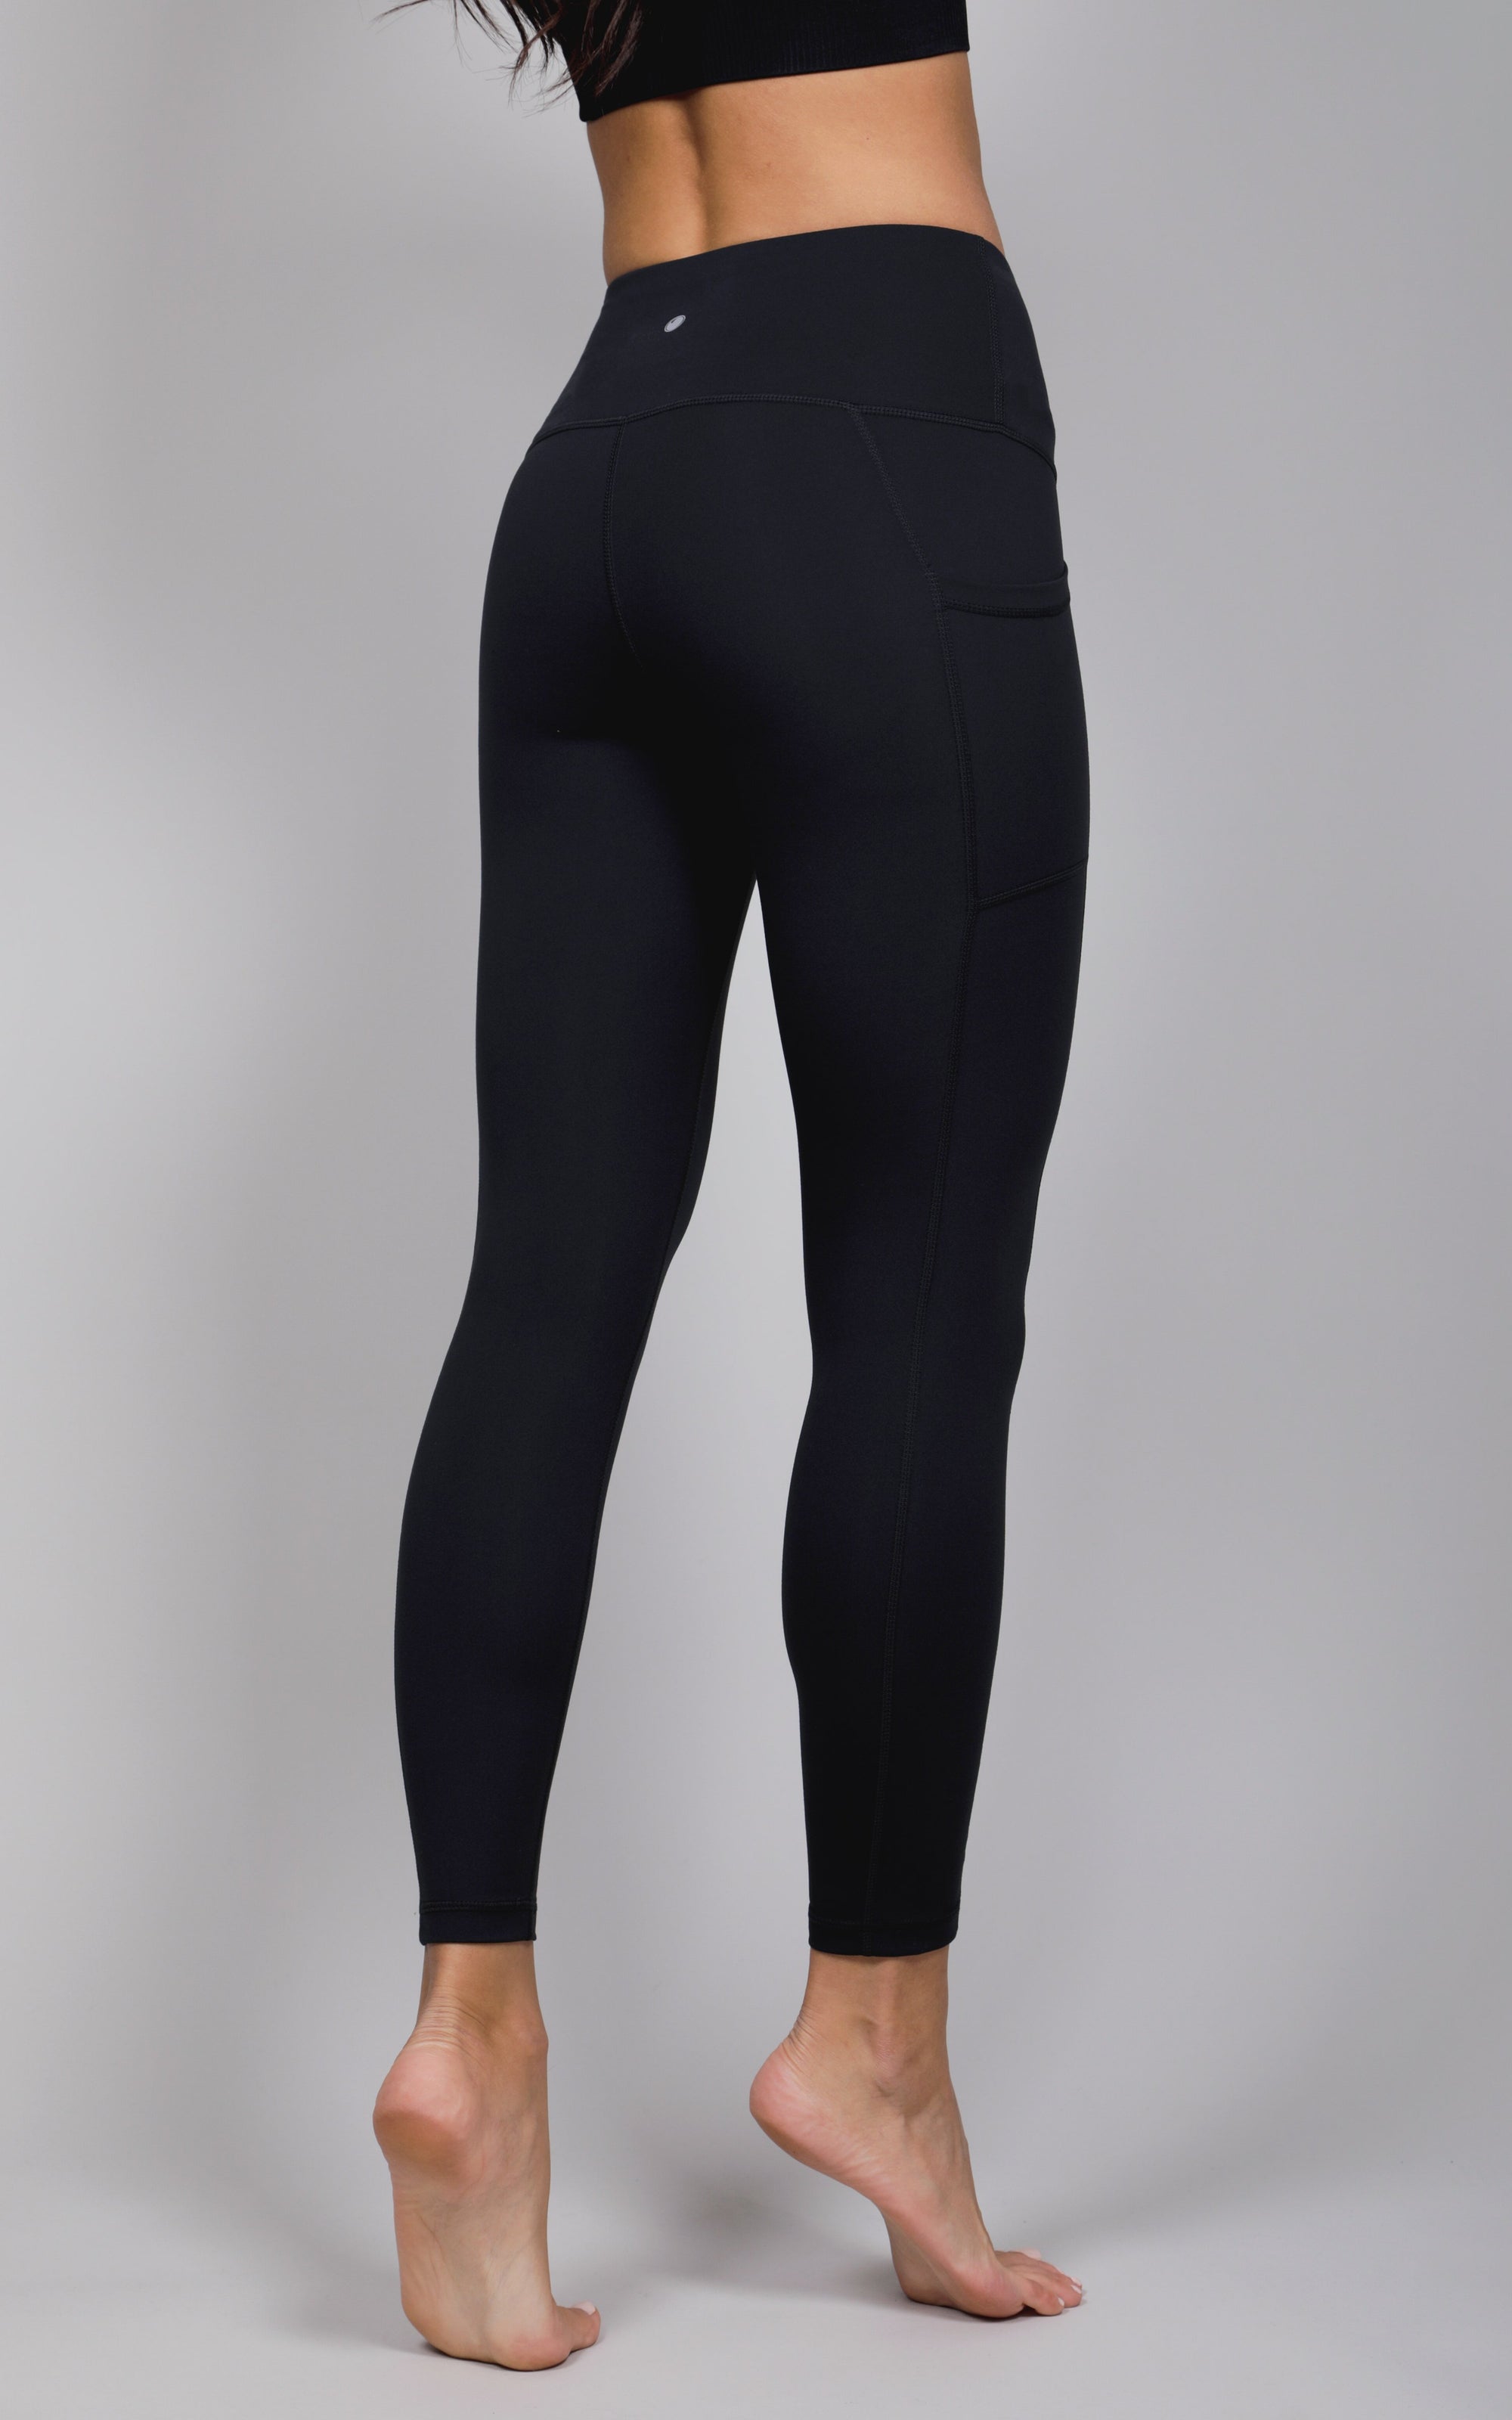 Yogalicious Lux Navy Blue Leggings Women's XL - $13 - From Emma